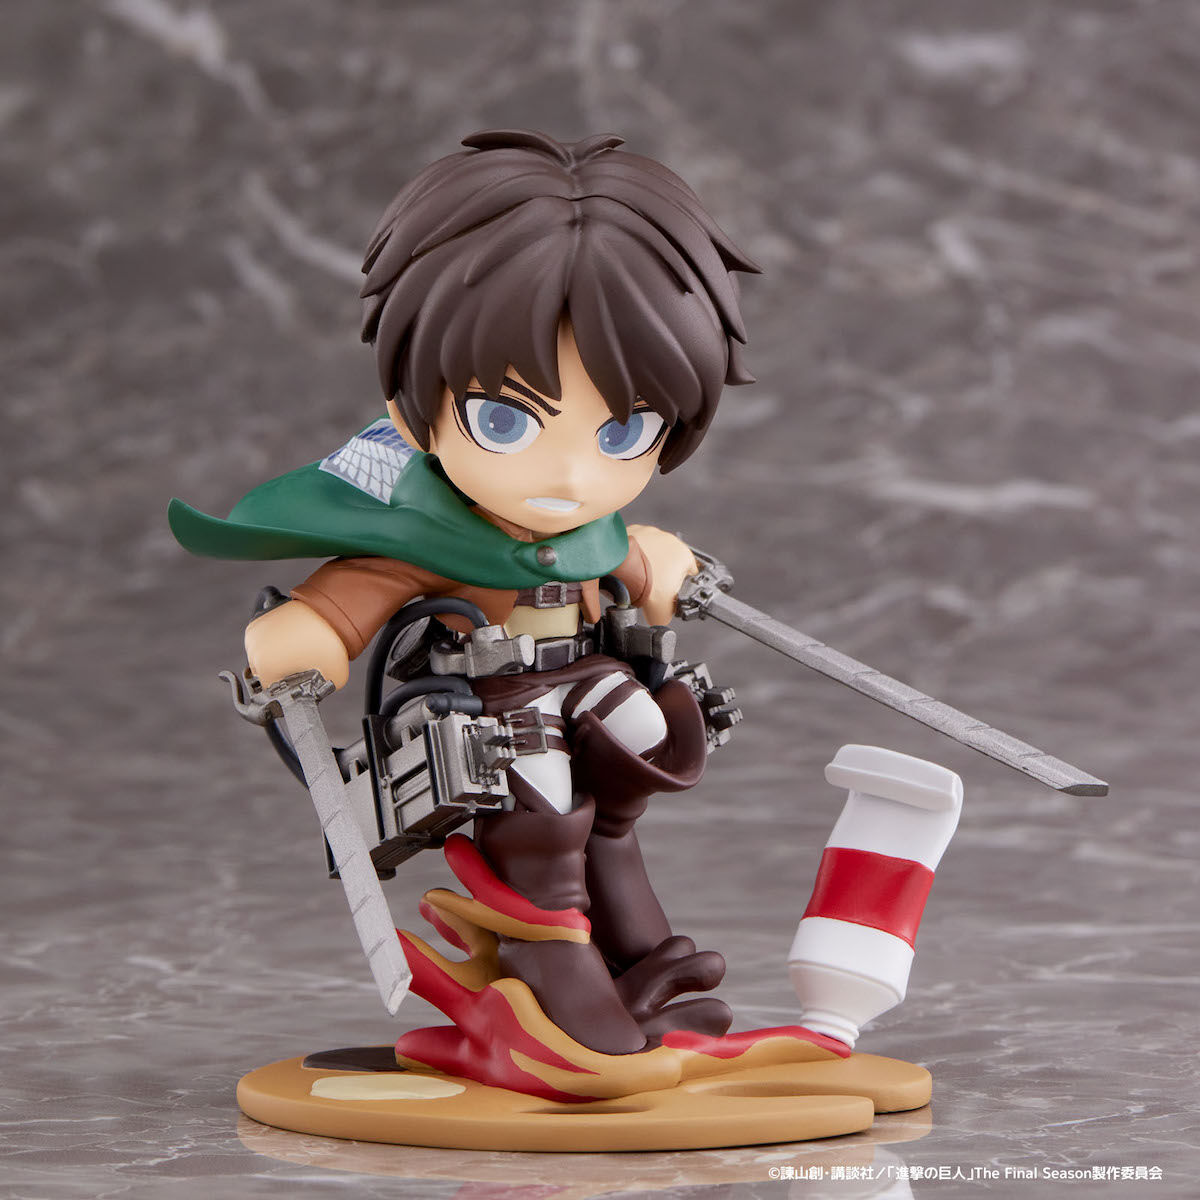 The 10 Most Expensive Anime Figures of All-Time, Ranked